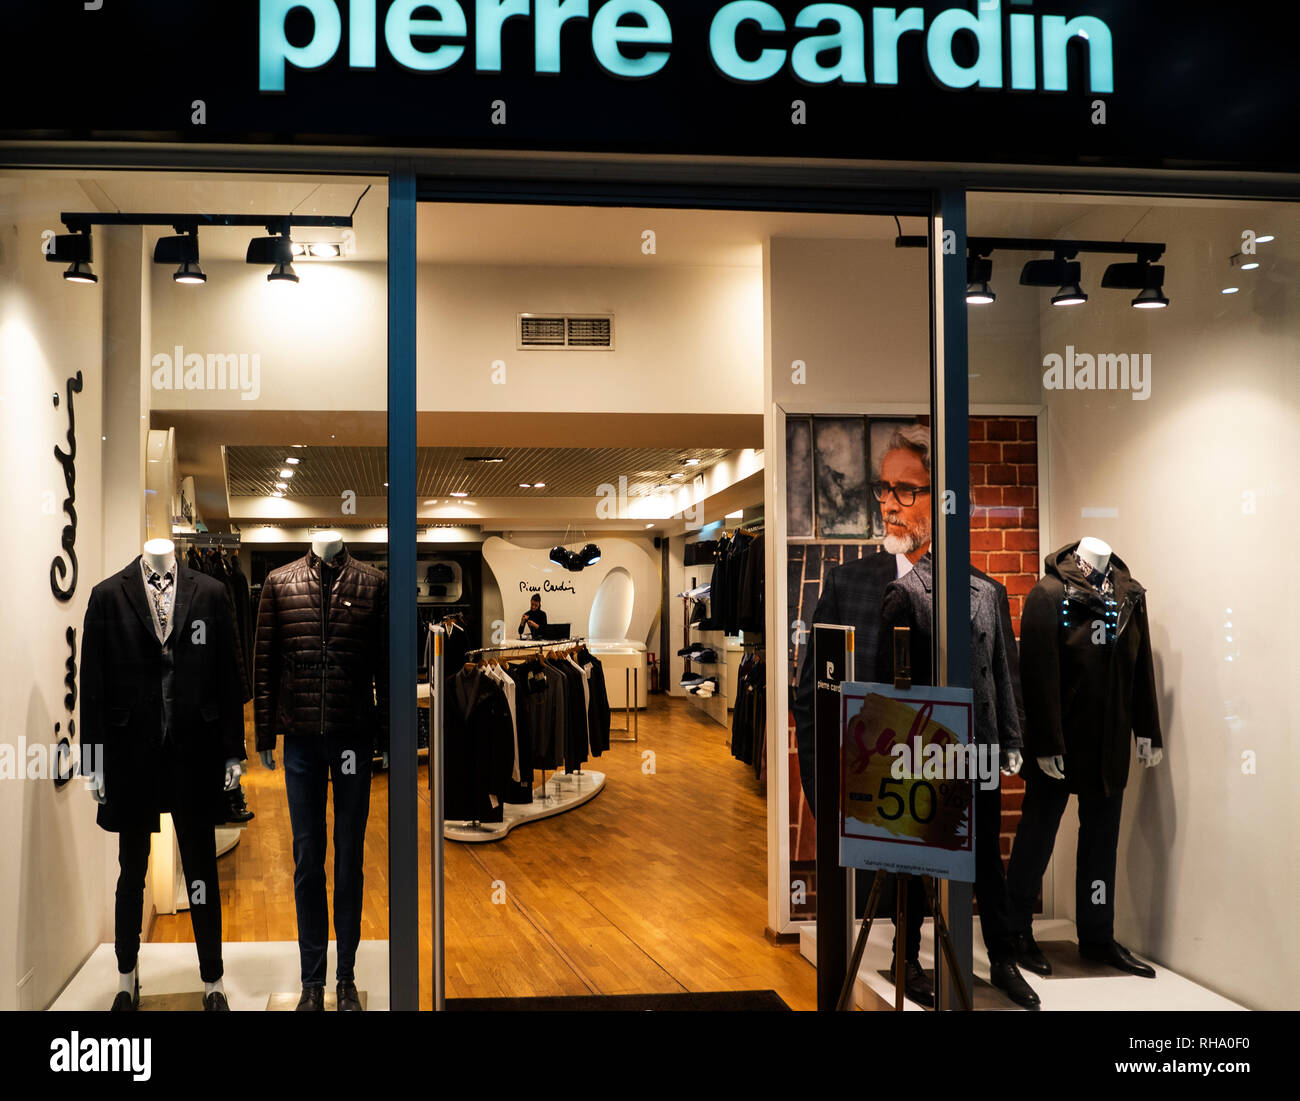 Pierre Cardin store in the mall Globus Stock Photo - Alamy